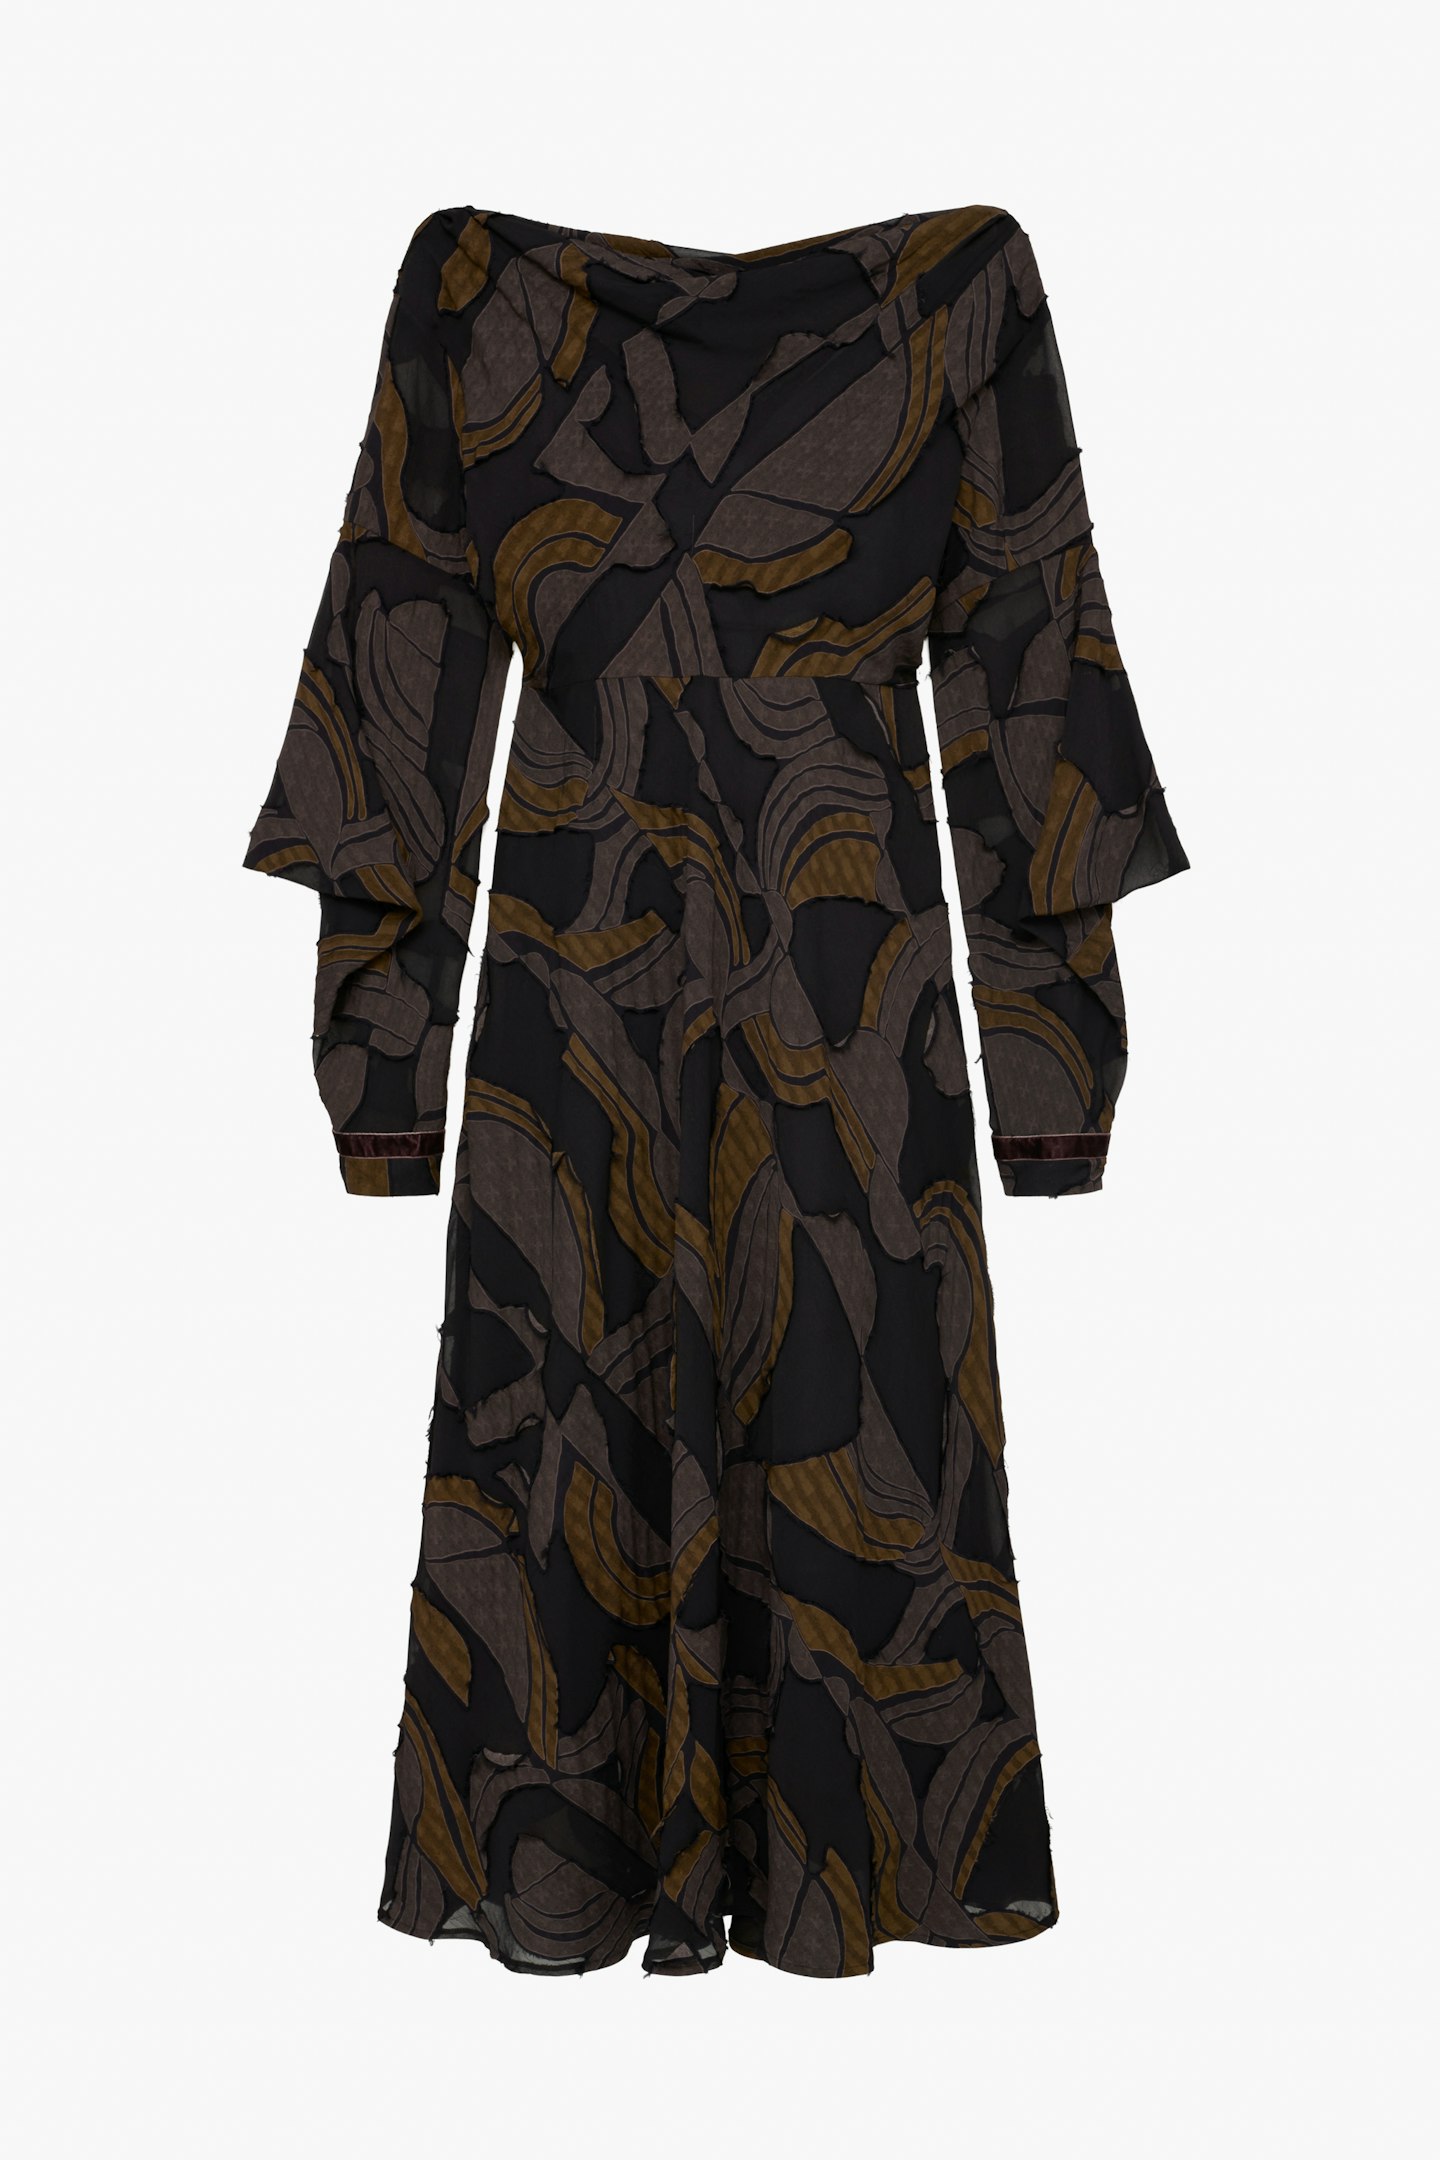 Limited Edition Long Dress, £109